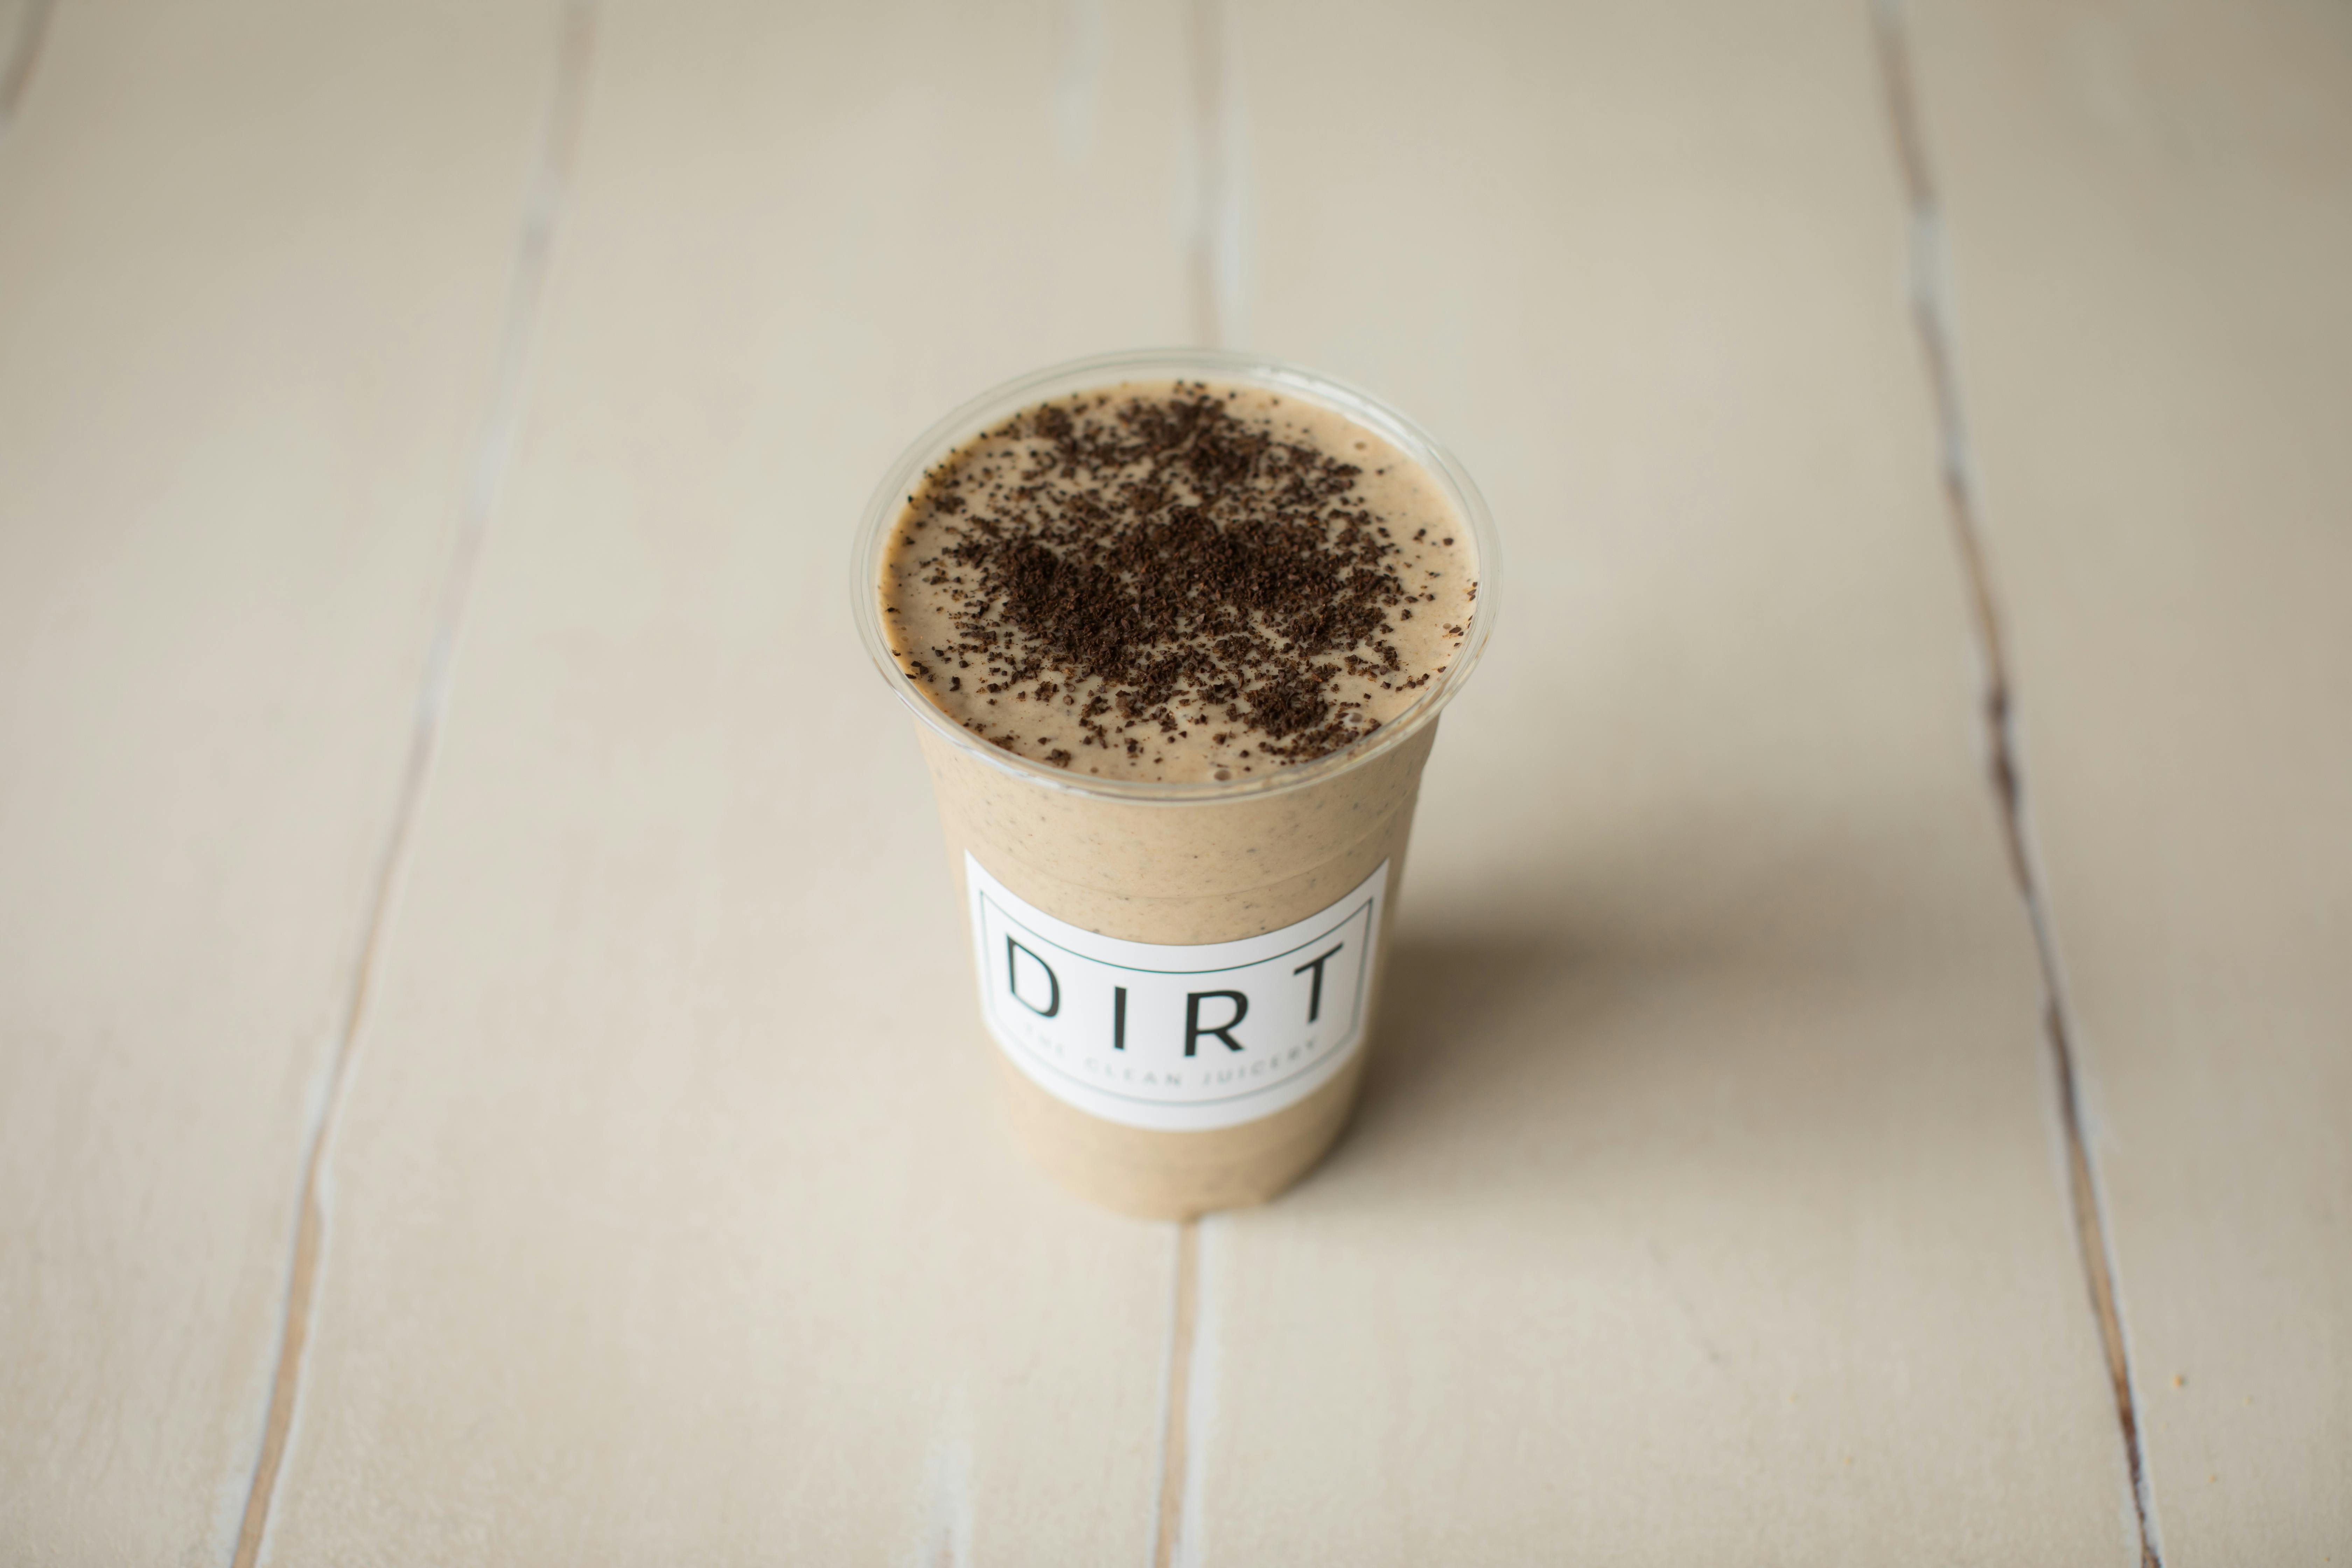 Morning Roar Smoothie from Dirt Juicery - Bay Park Square in Green Bay, WI